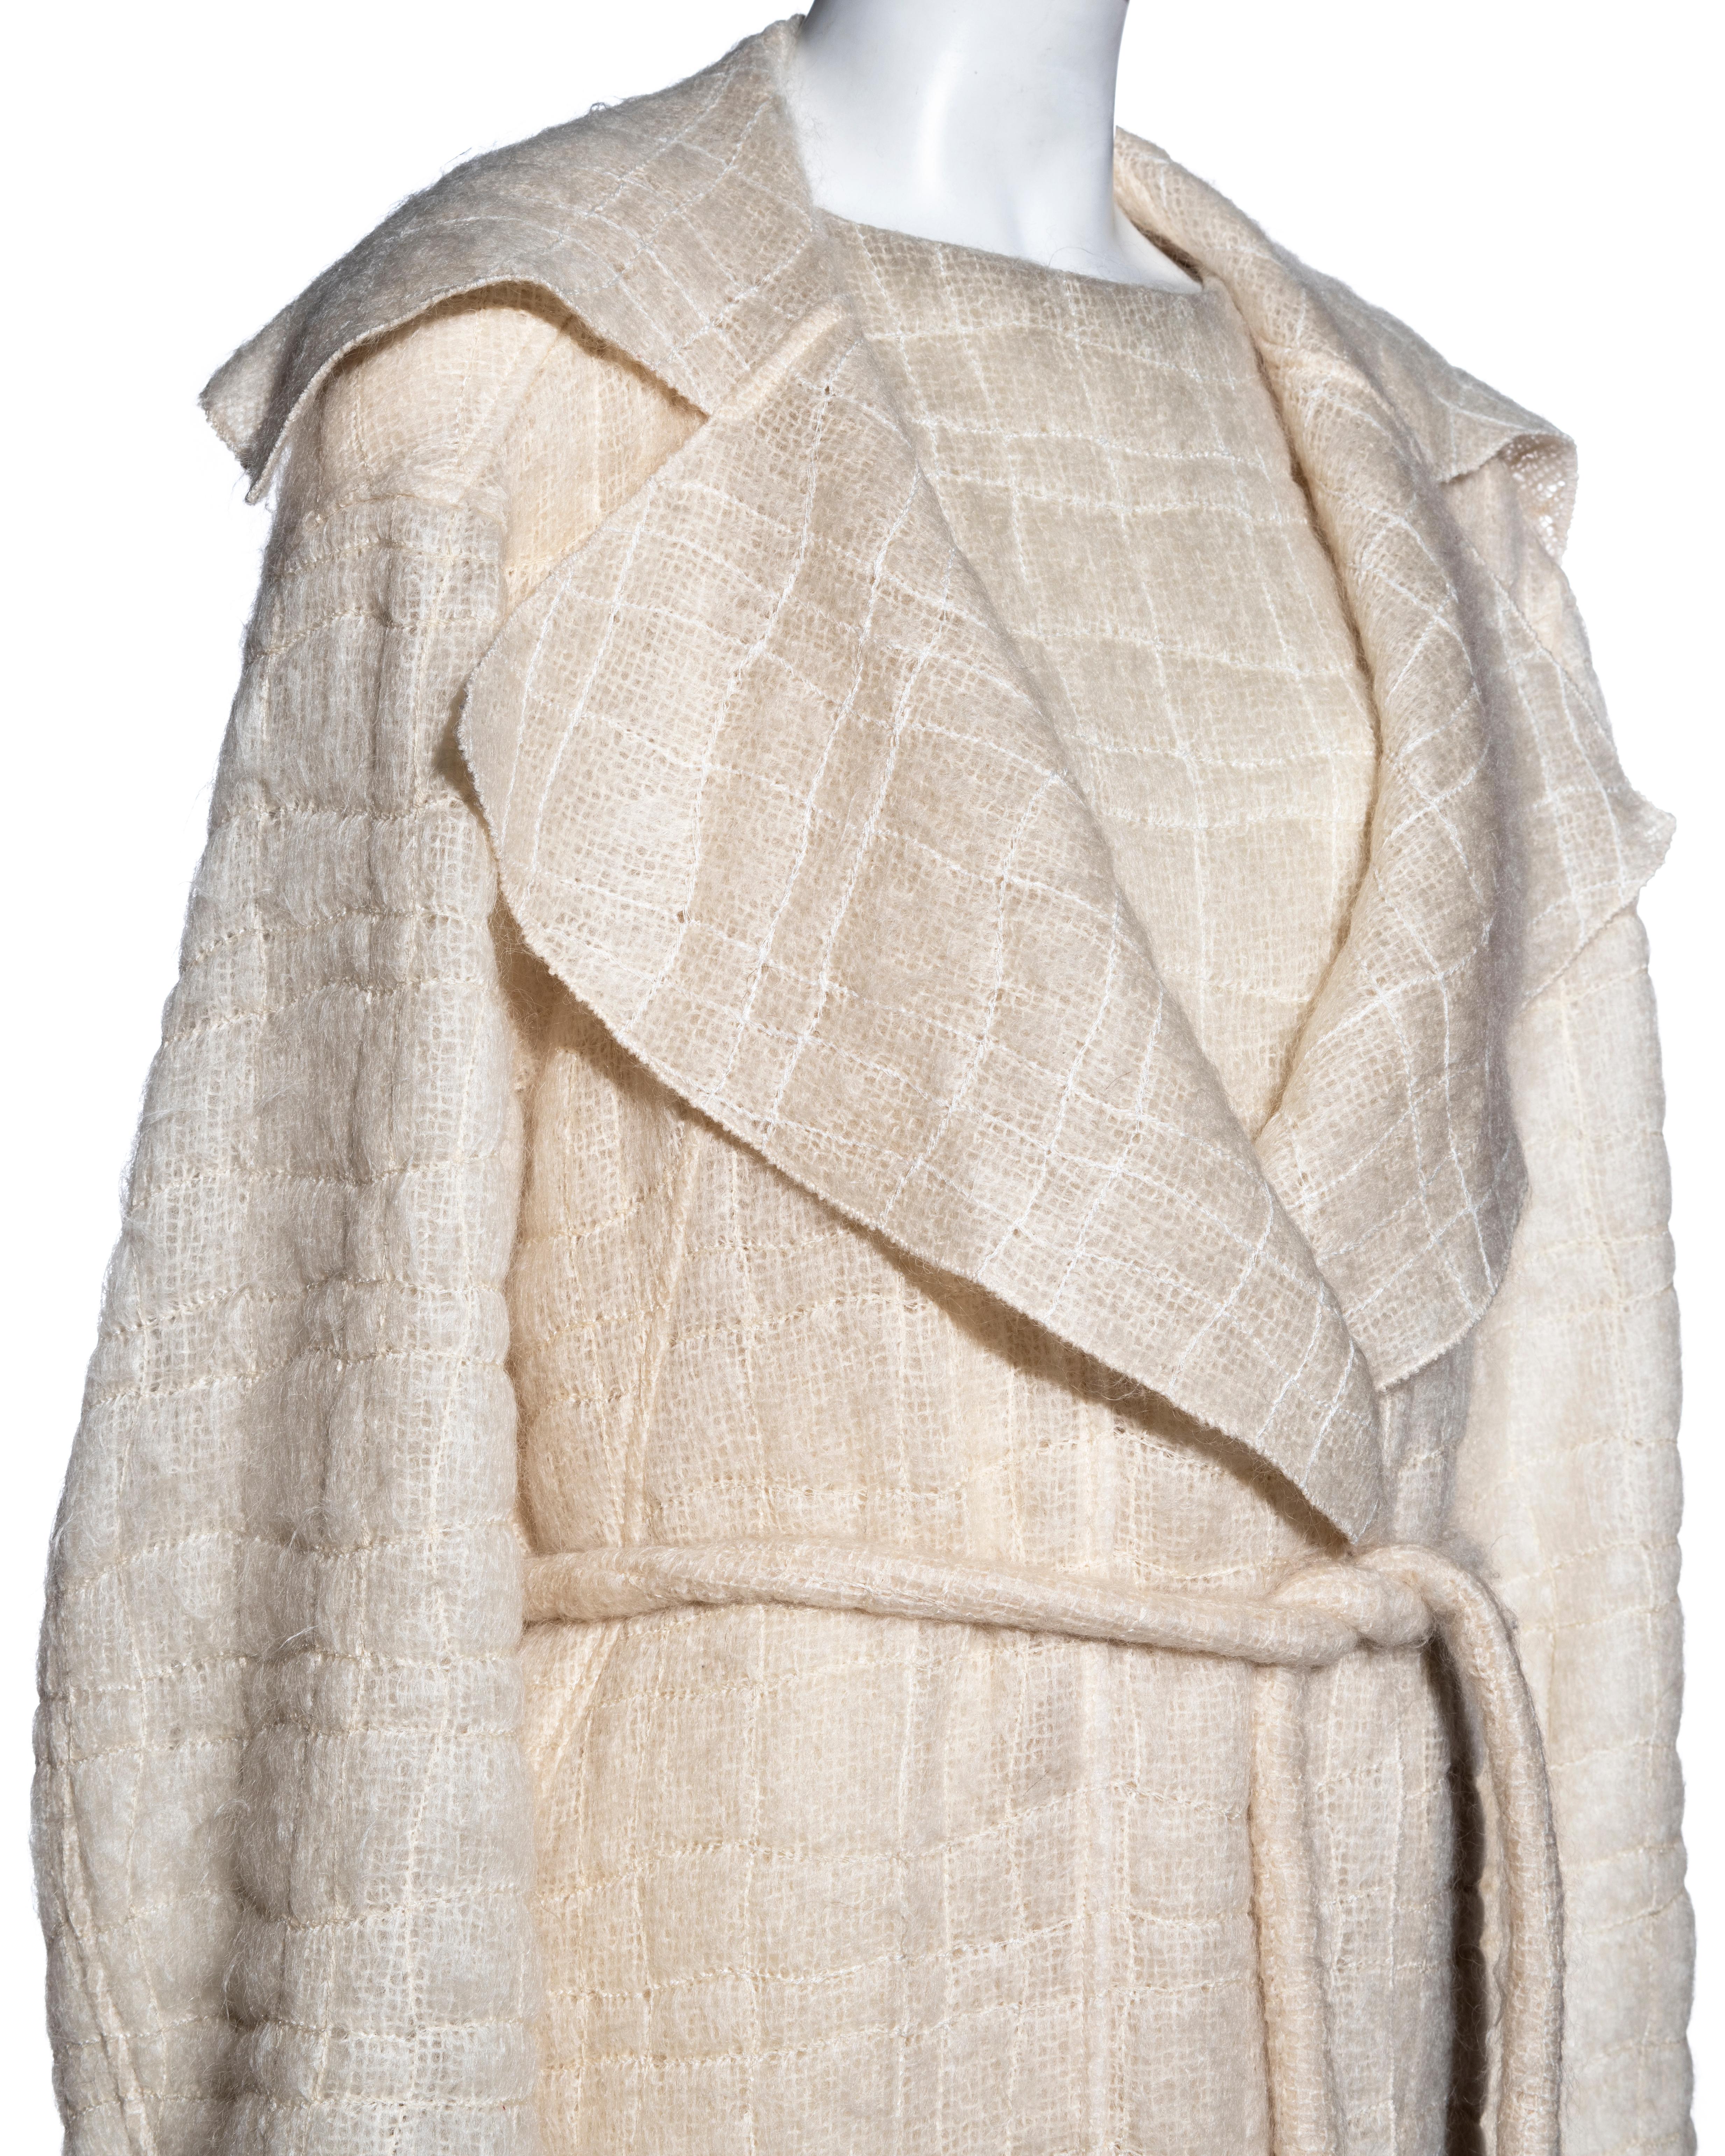 Chanel by Karl Lagerfeld cream mohair wool coat and dress ensemble, fw 1998 In Excellent Condition For Sale In London, GB